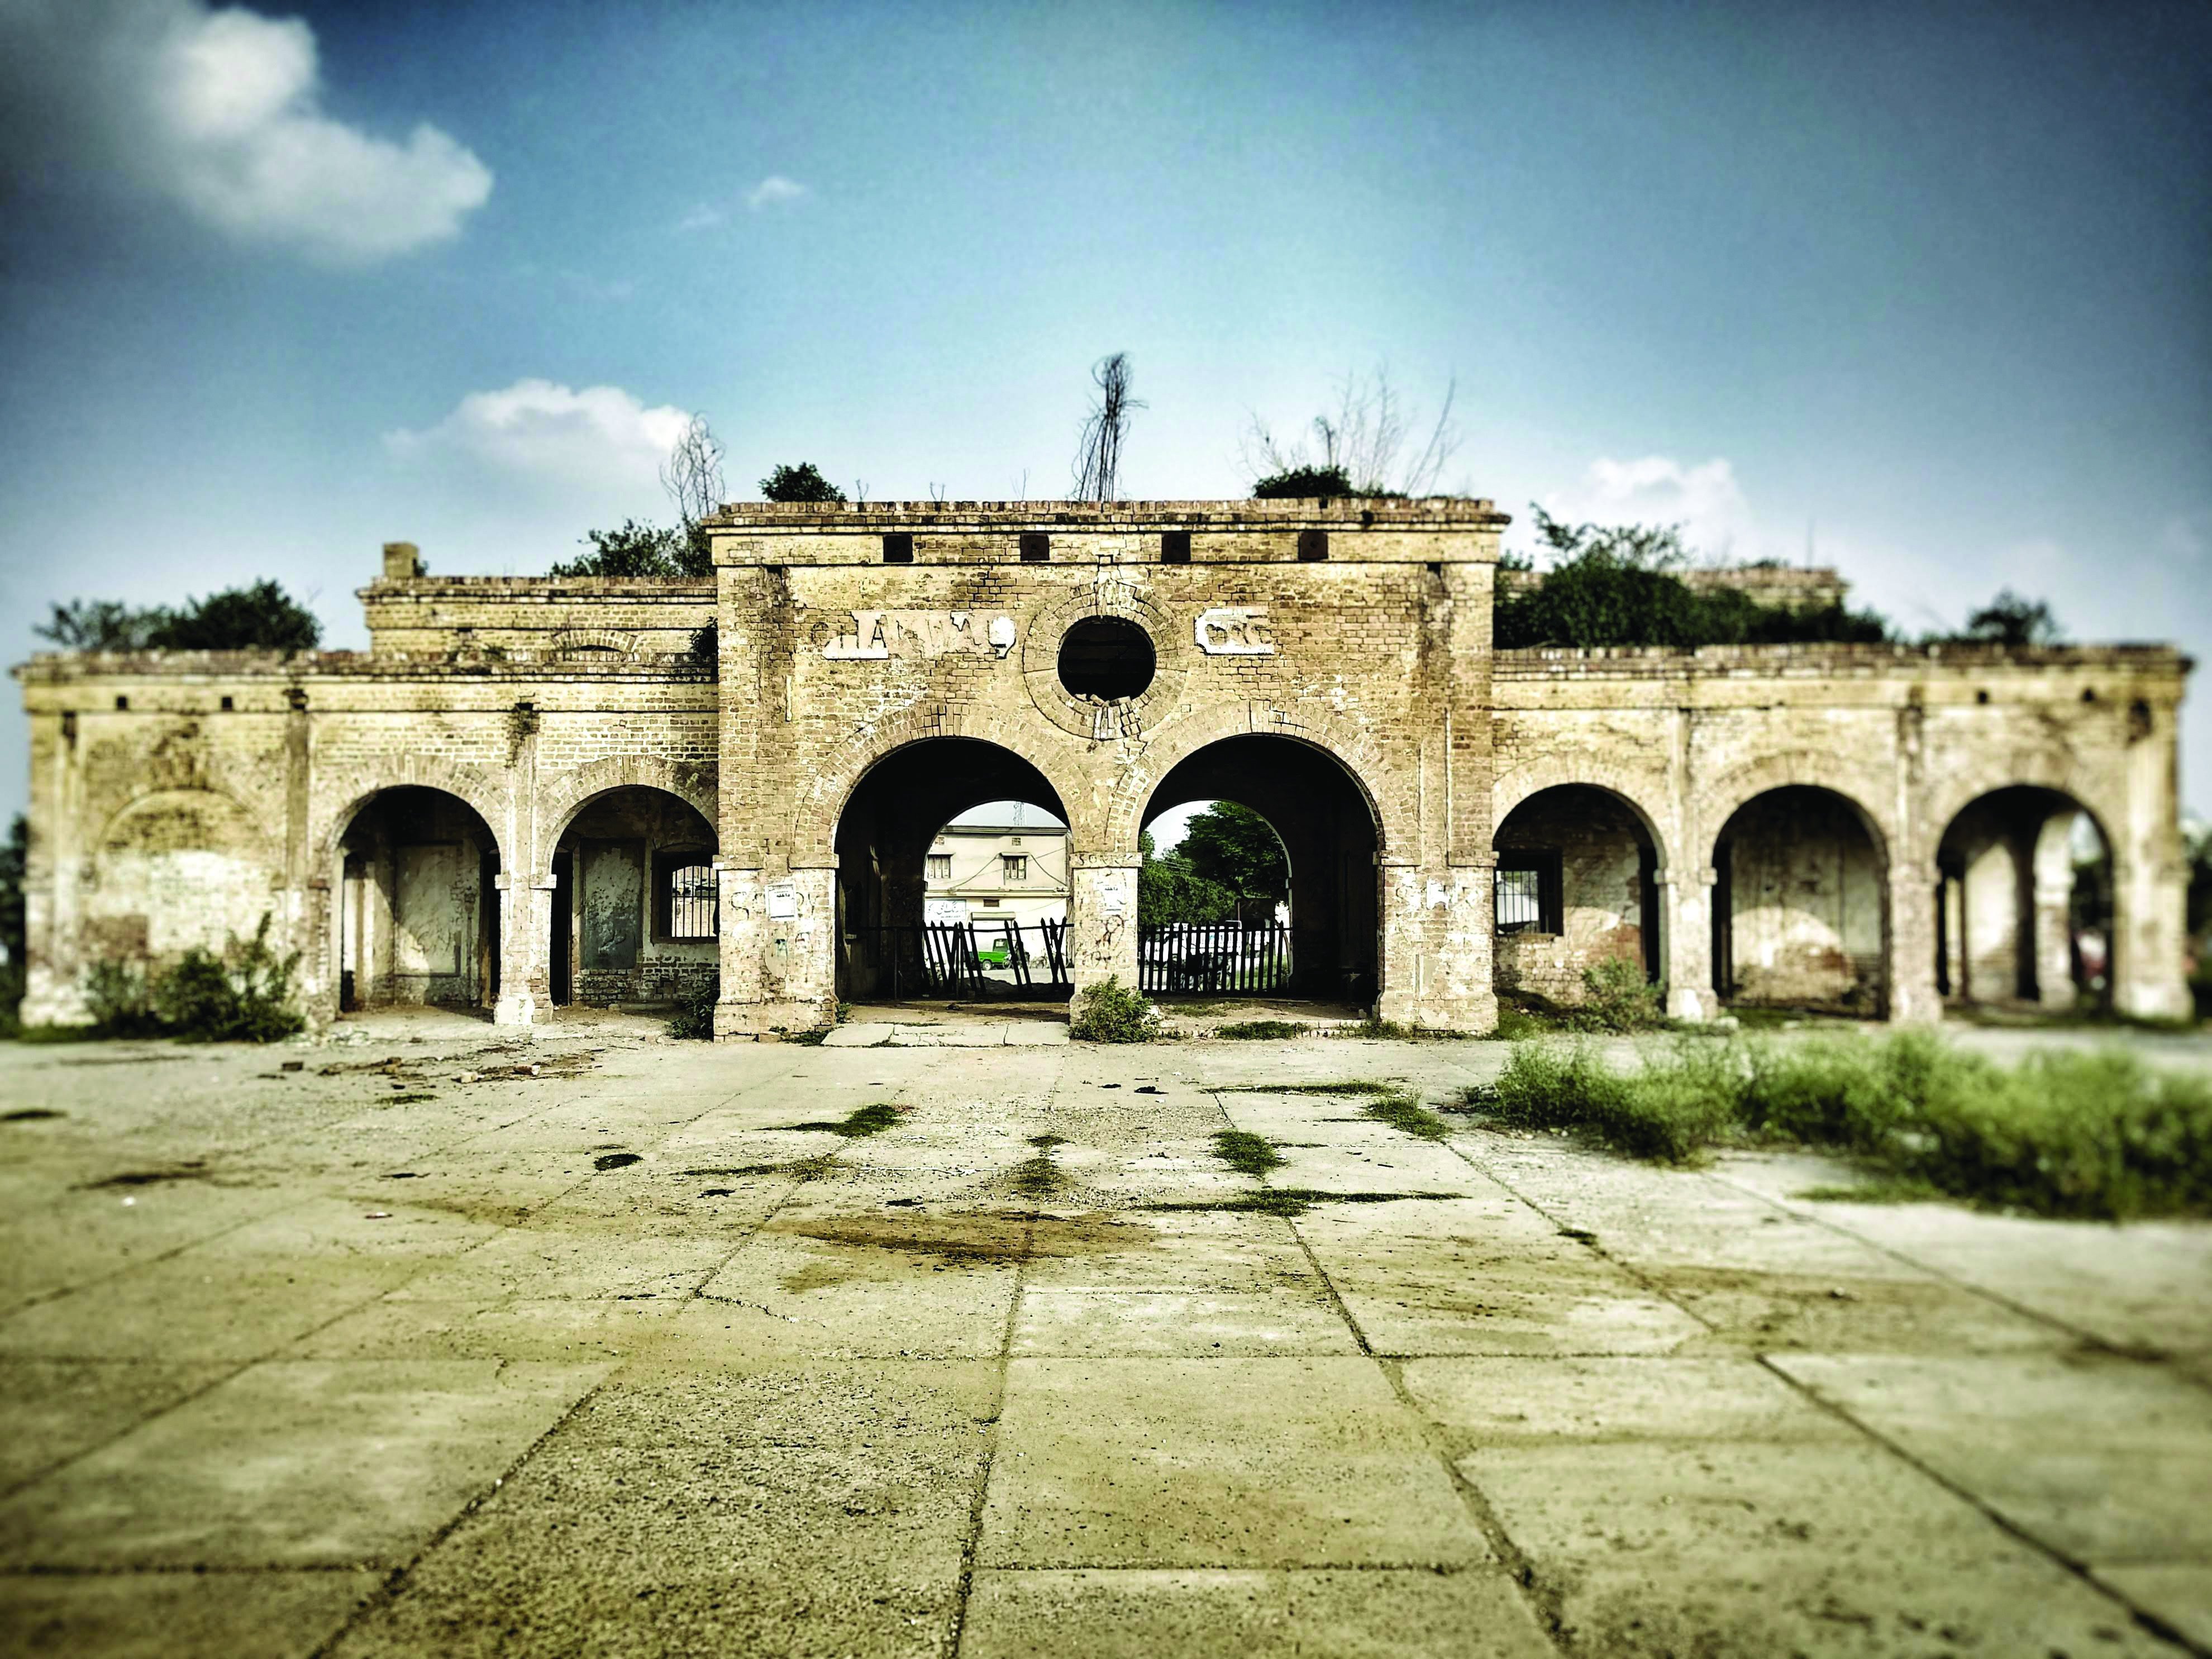 Bhoun Station in Pakistan is a spectacular example of an abandoned train station. From war to dying industries, there are many reasons train stations became disused. Photo: Shutterstock